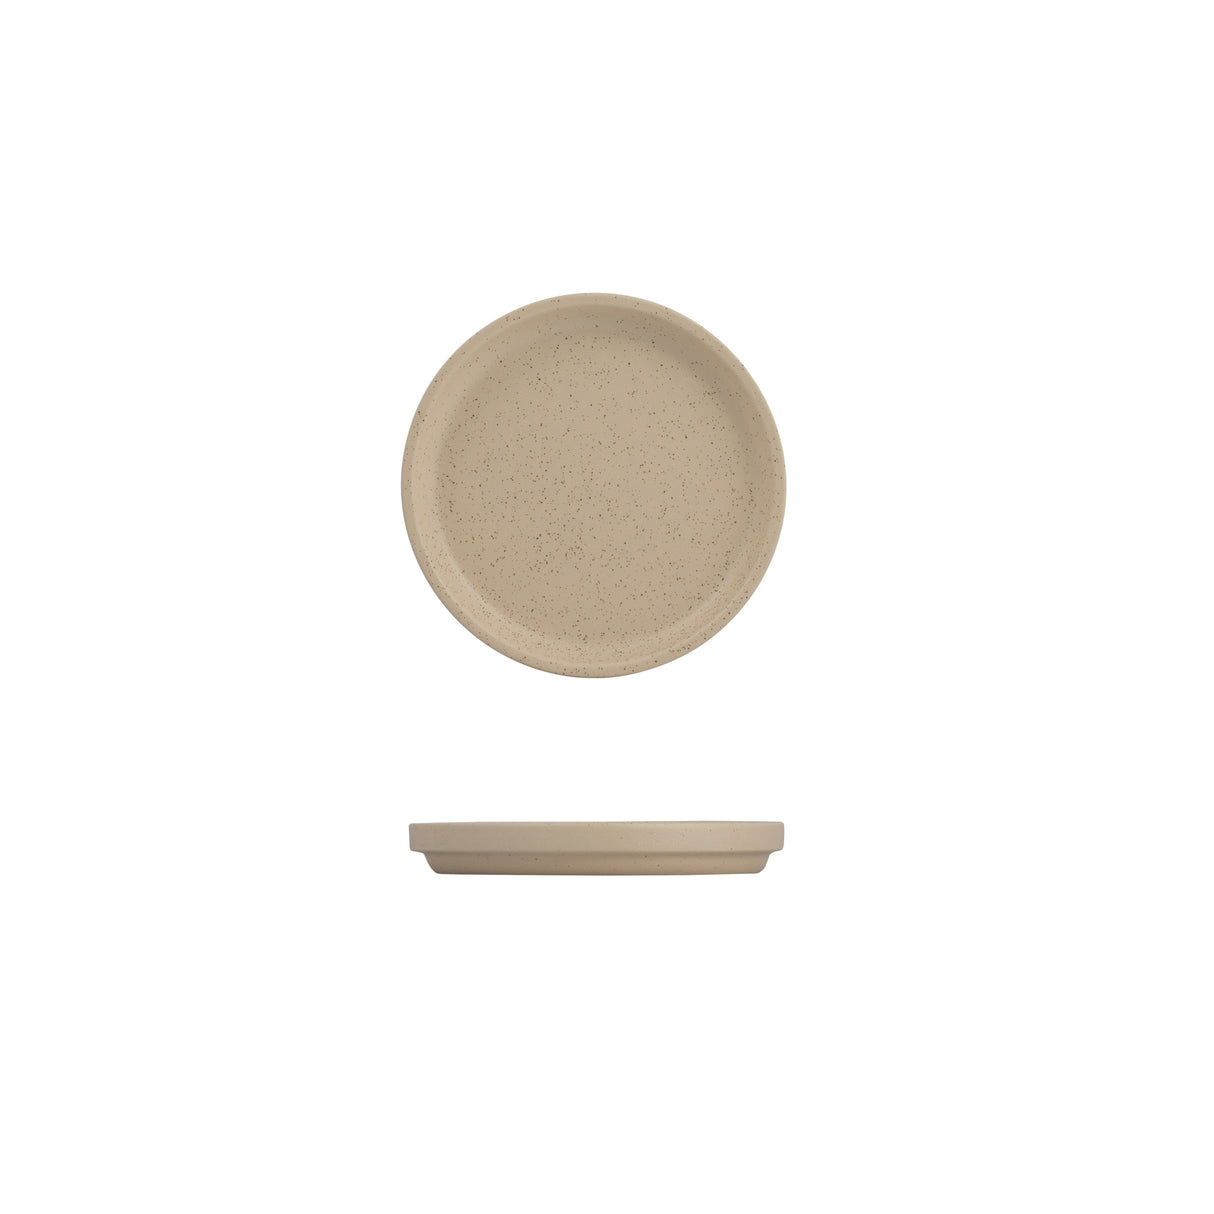 Stackable Round Plate - 160Mm, Clay from Luzerne. Stackable and sold in boxes of 6. Hospitality quality at wholesale price with The Flying Fork! 